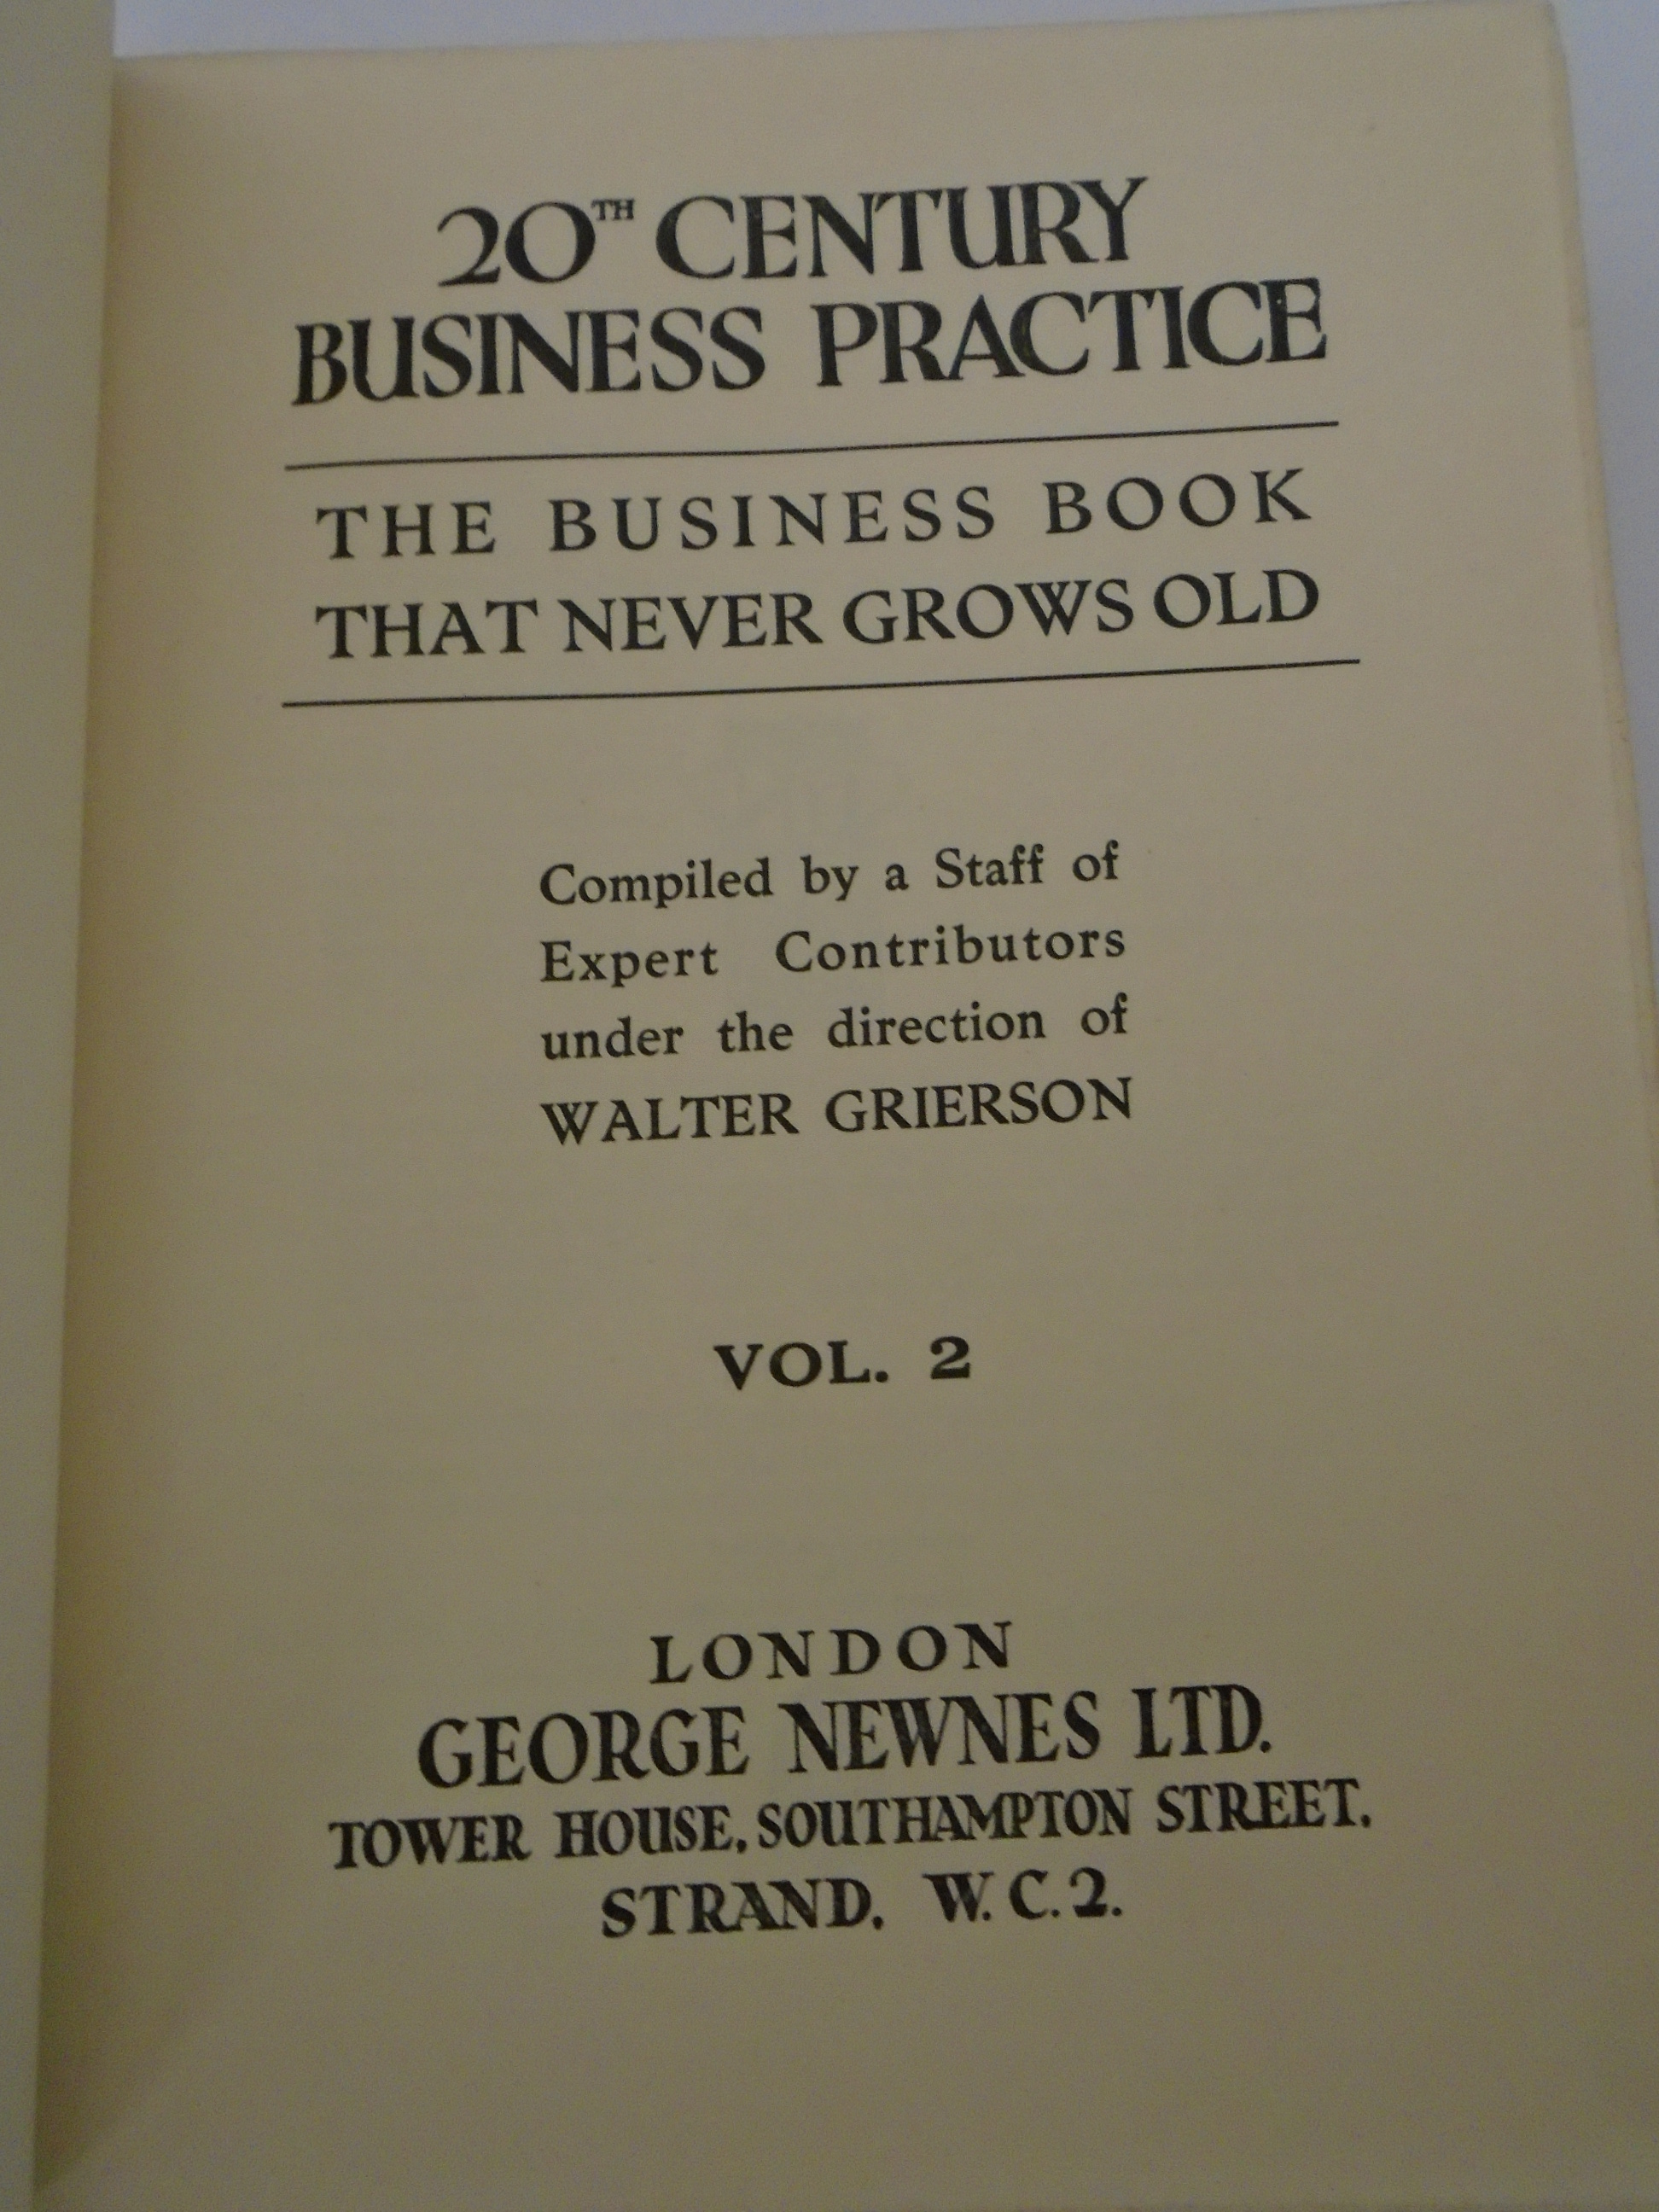 6 VOLUMES OF 20TH CENTURY BUSINESS PRACTICE CIRCA 1950 - Image 2 of 4